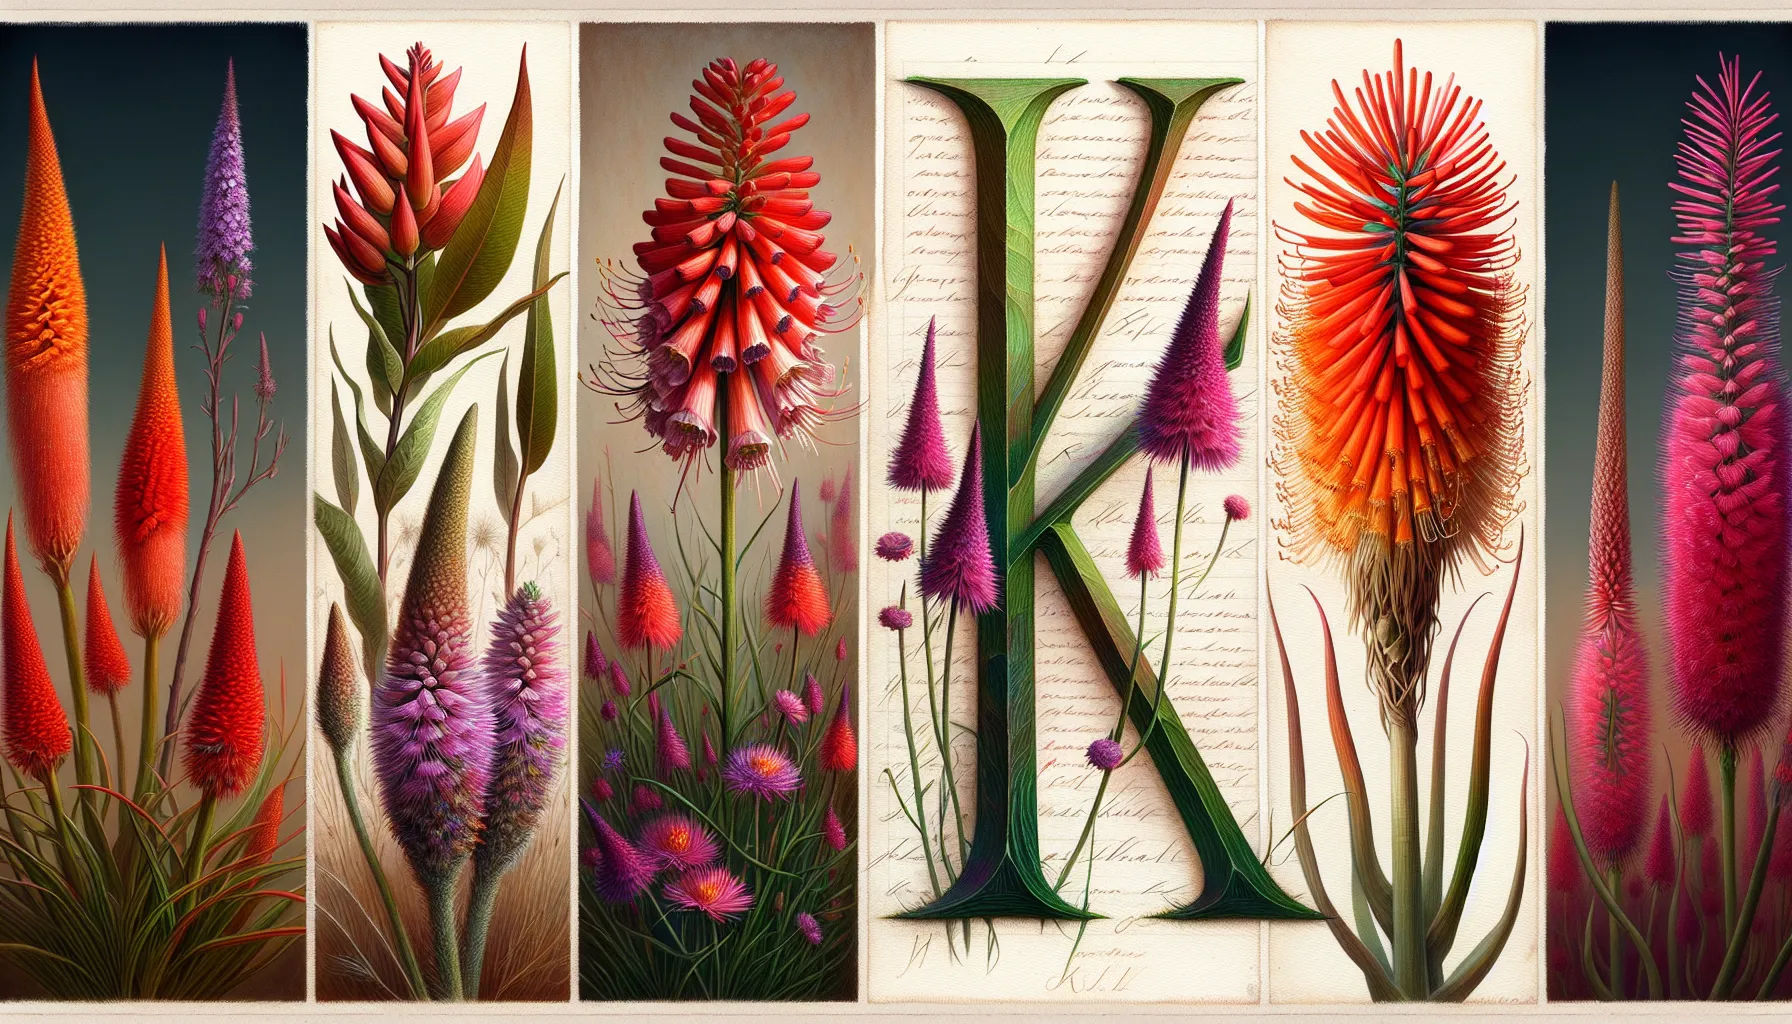 A vibrant artistic montage of various flowers that start with K, with a large letter "K" in the center surrounded by botanical illustrations.